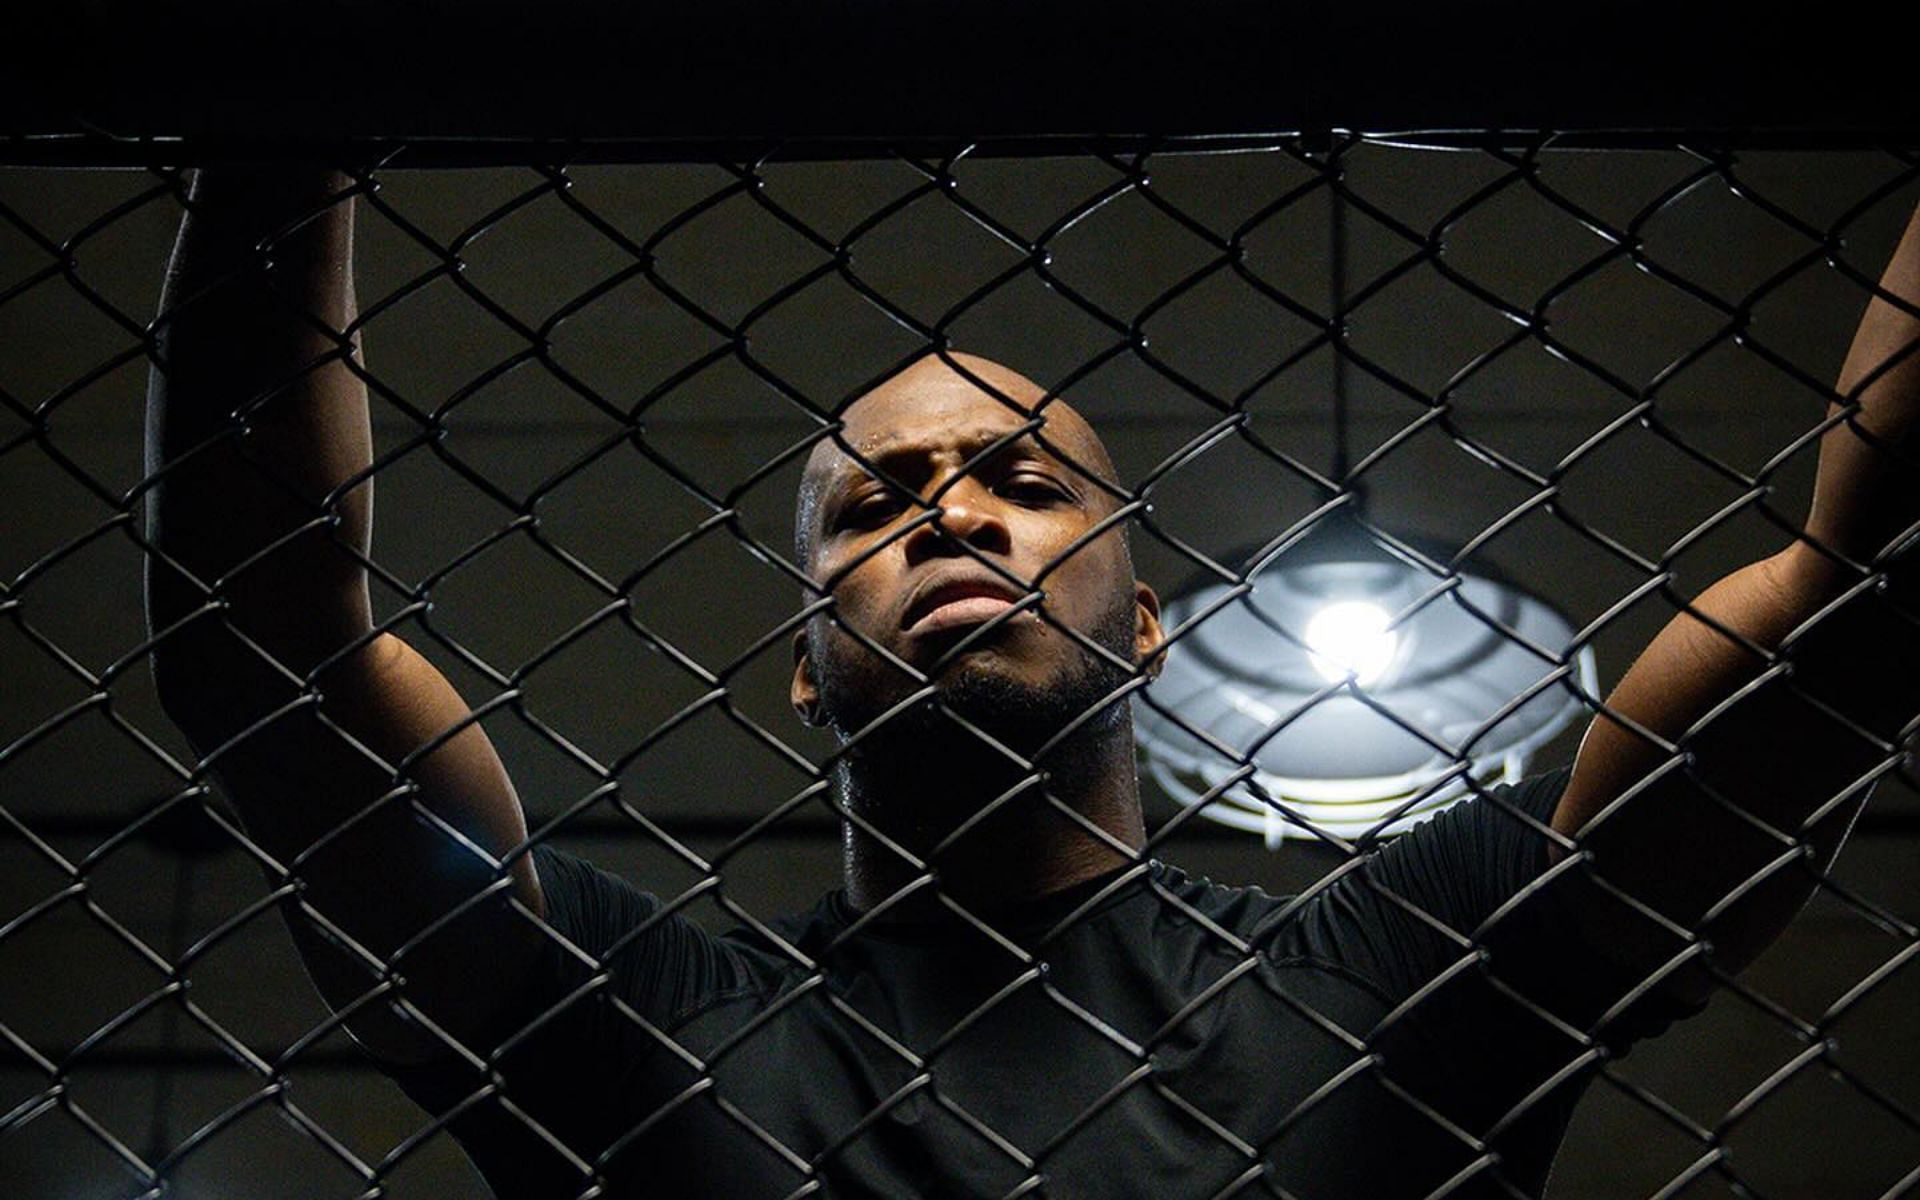 Michael &lsquo;Venom&rsquo; Page will hope to steal the show in his UFC debut this weekend